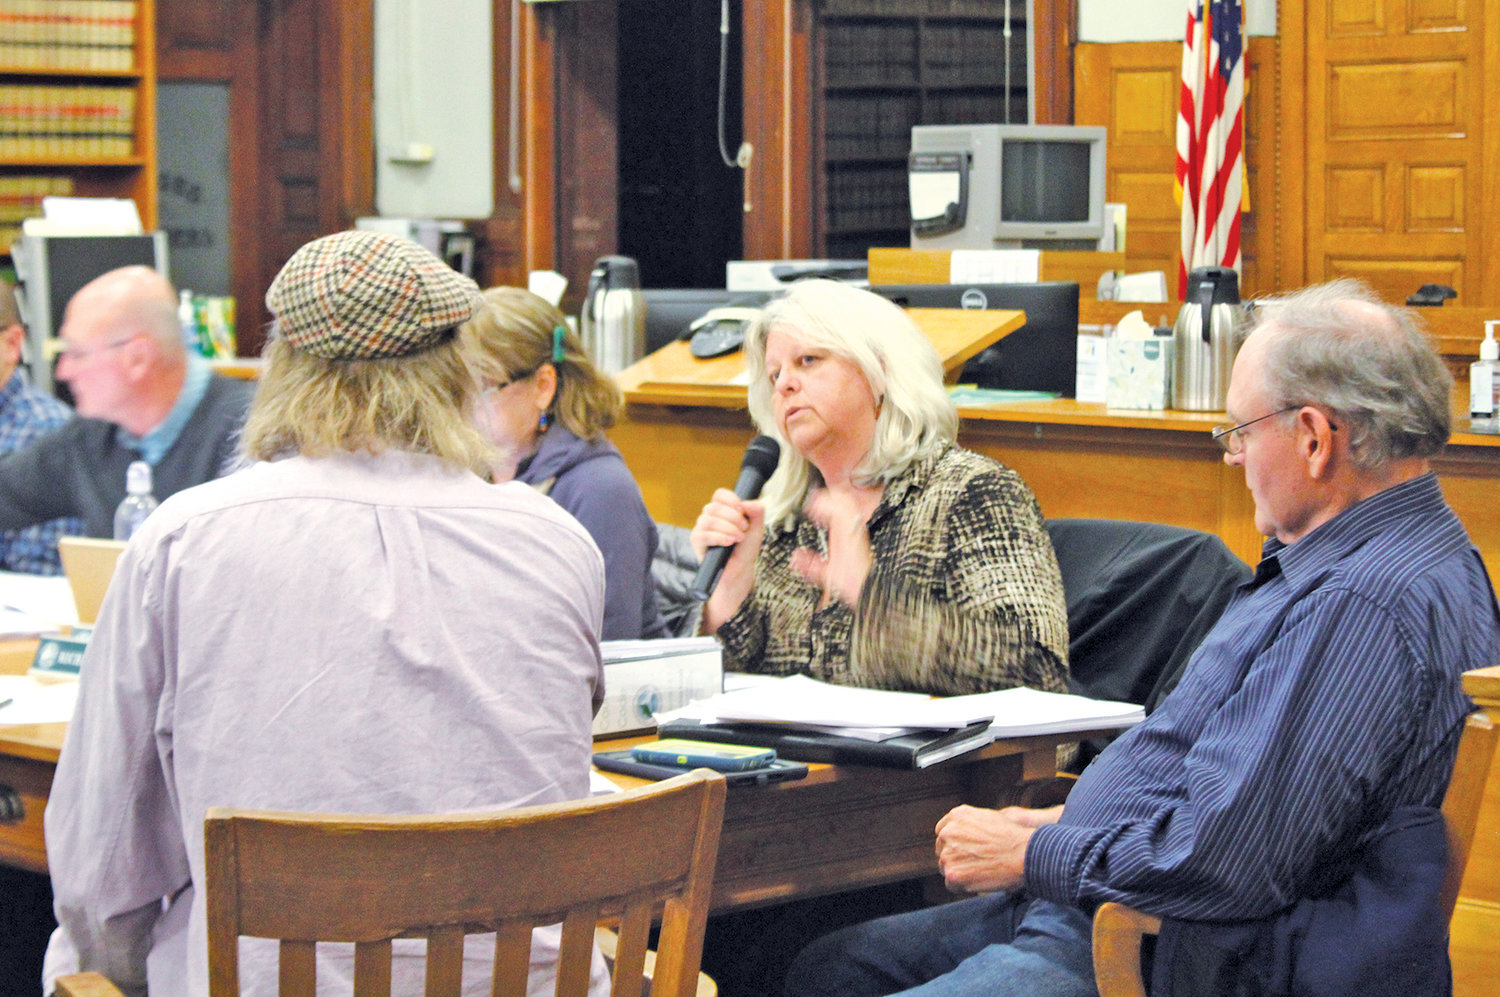 “We have some independence to make our own recommendations,” planning commission vice chair Cynthia Koan said at the Nov. 19 meeting while discussing changes to Title 18 in the county code, regarding commercial shooting facilities.